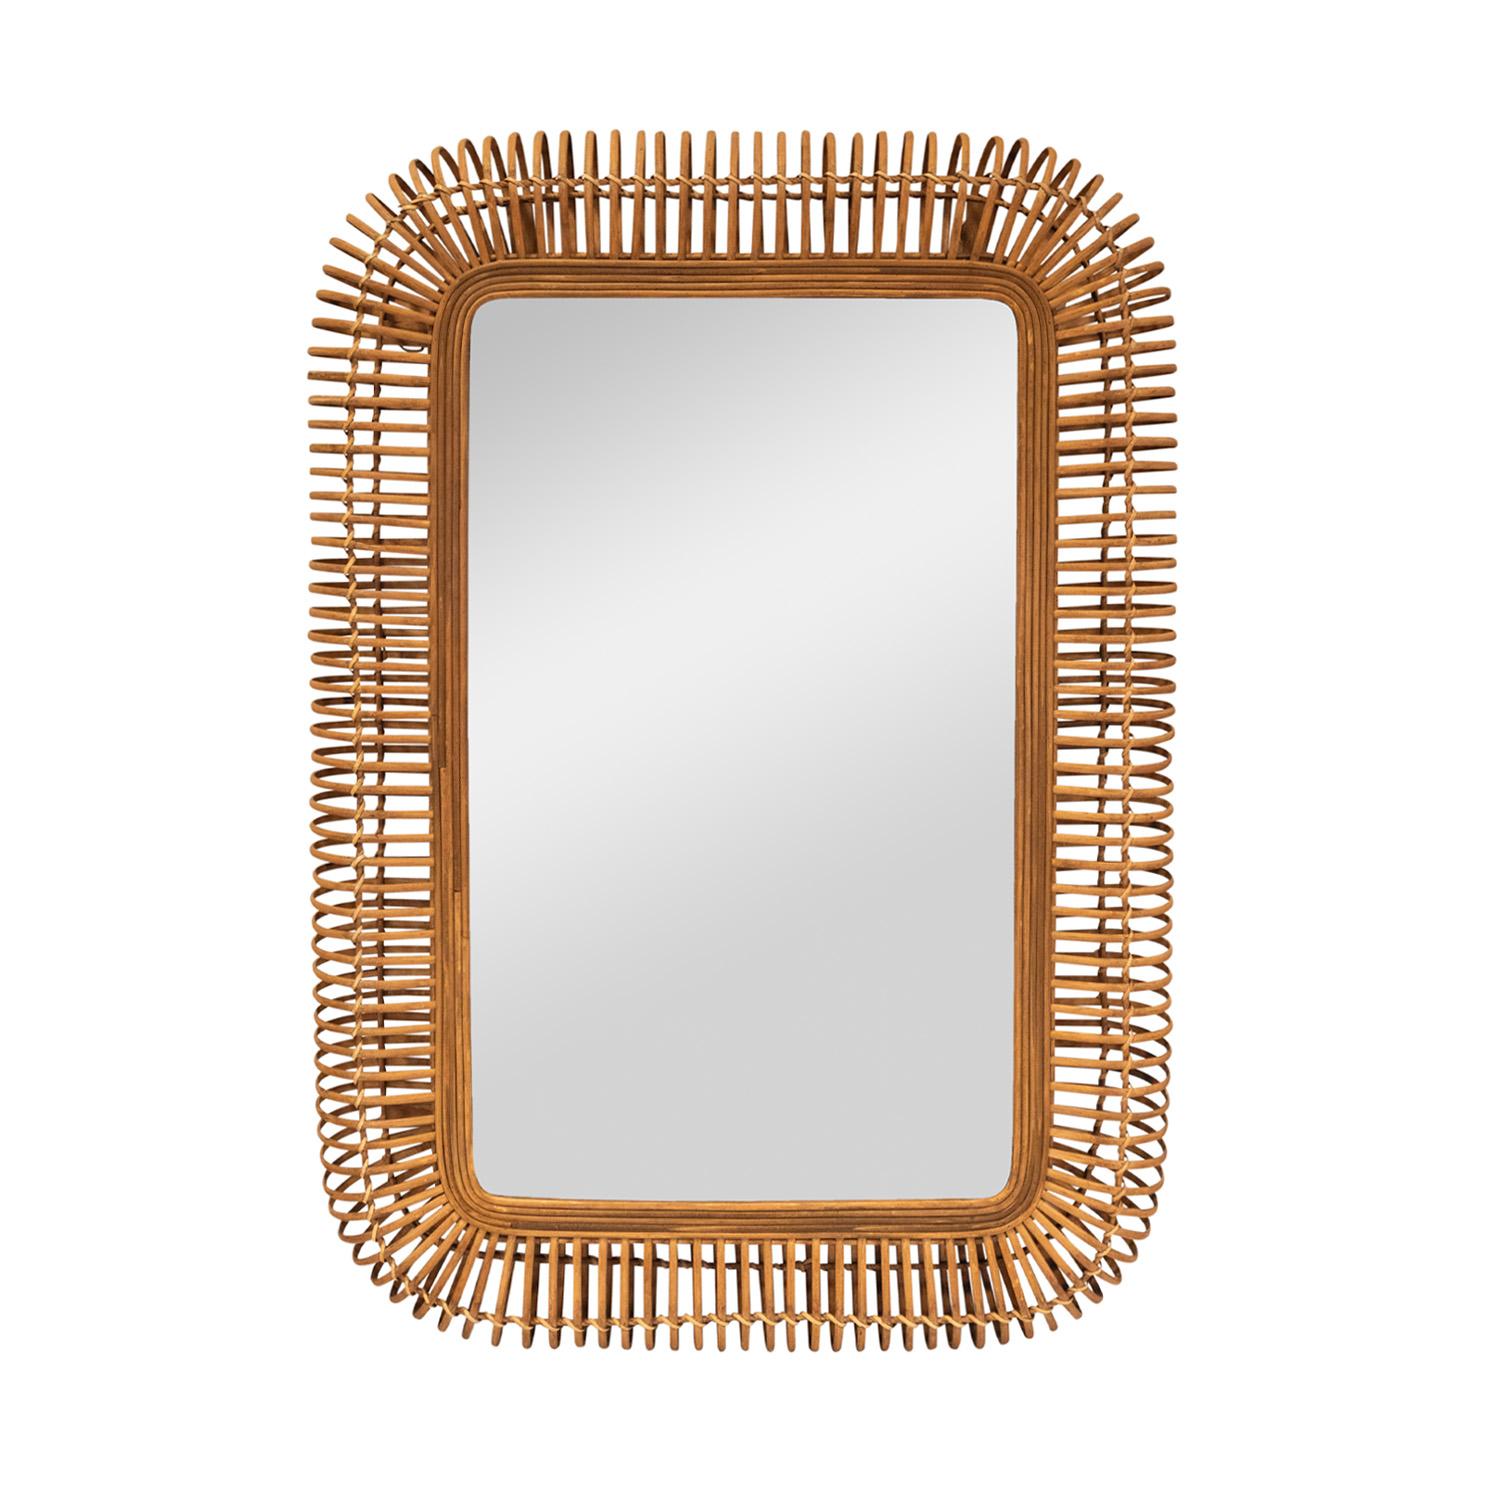 Beautifully made wall-hanging rectangular mirror with impressive looped and woven rattan frame, Italian 1960's.  This mirror is very chic and would enhance any interior.  This  mirror can hang vertically (as shown) or horizontally.